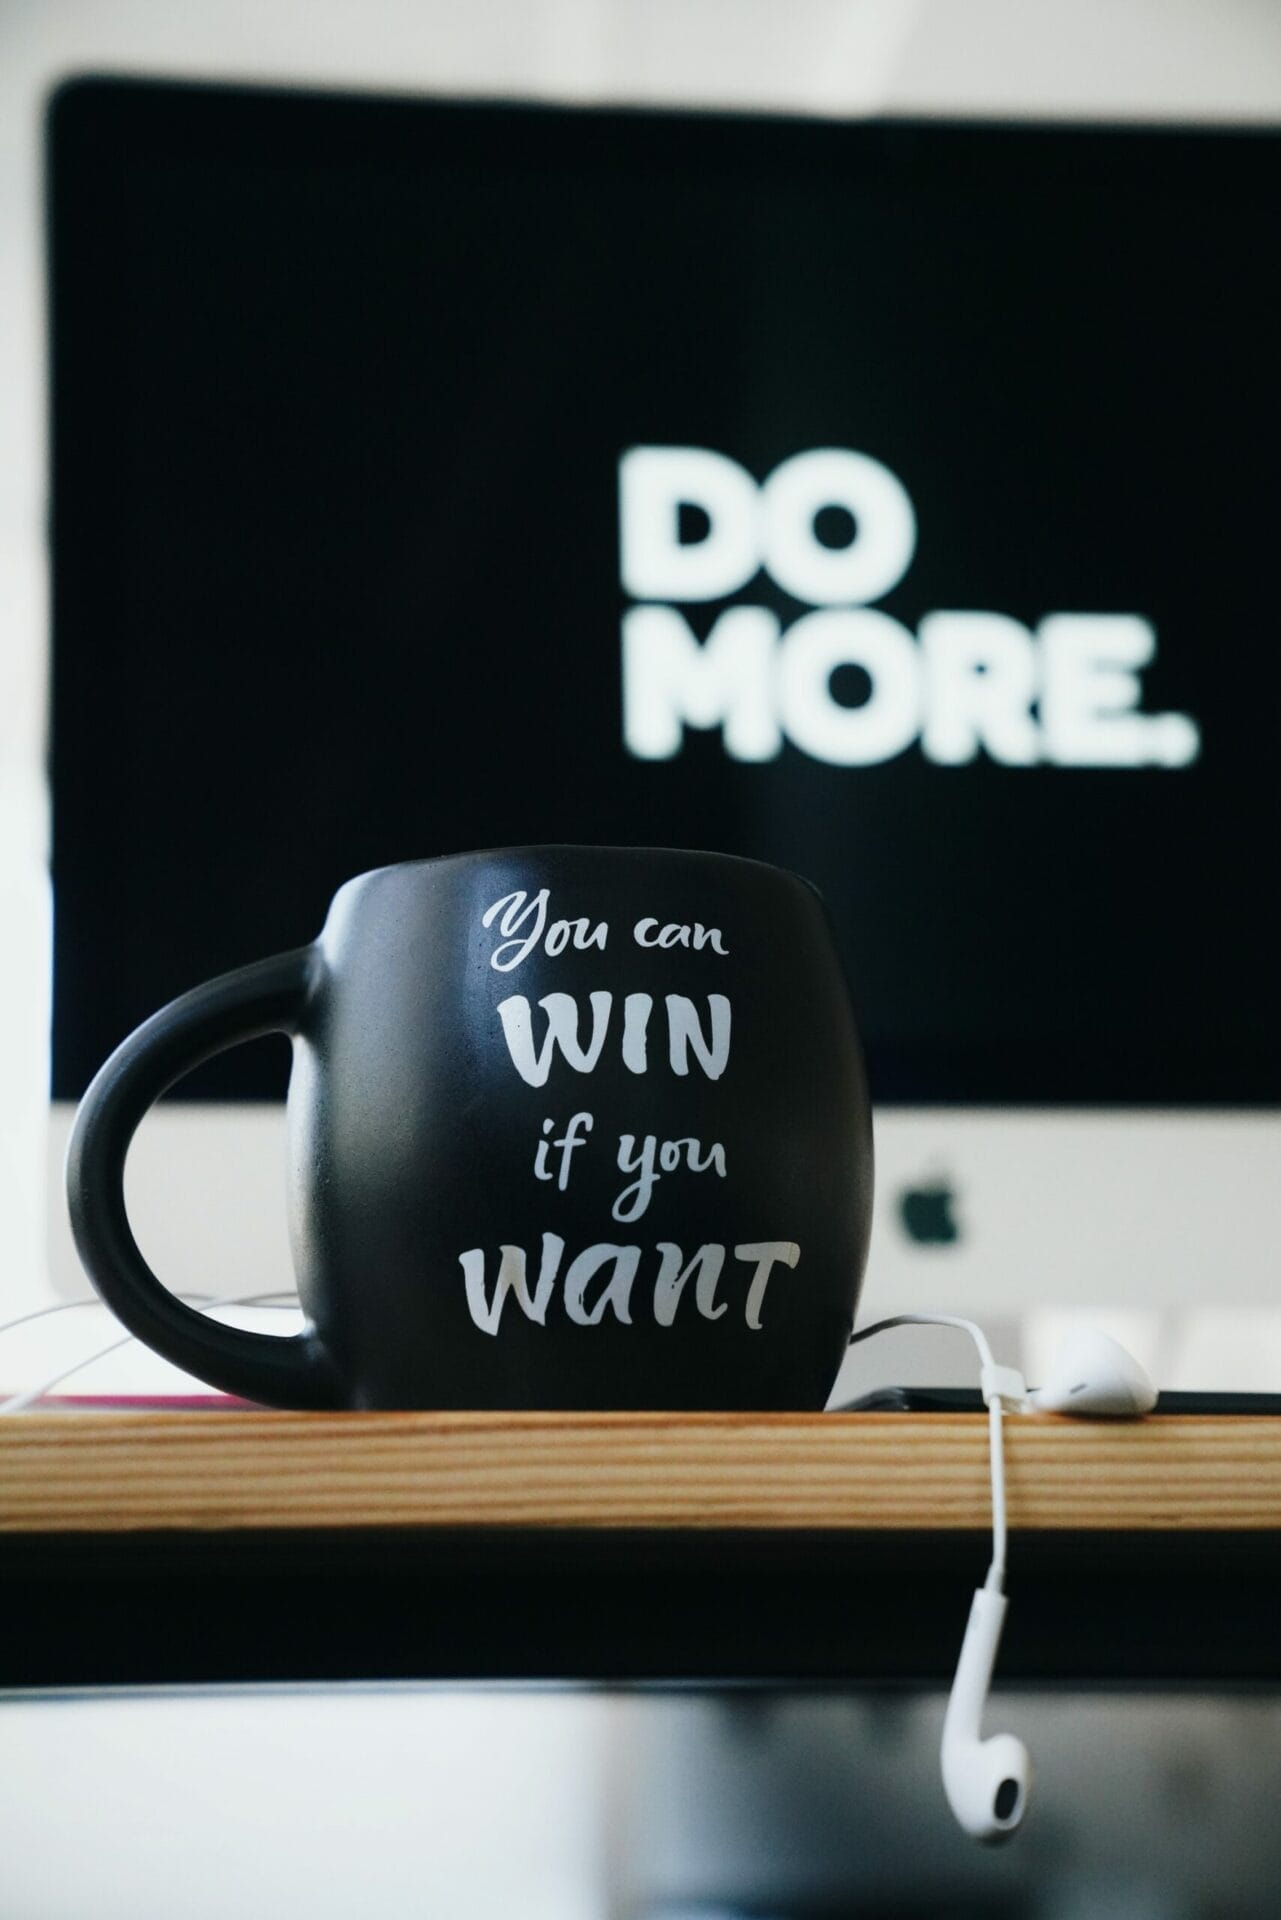 Do more and win